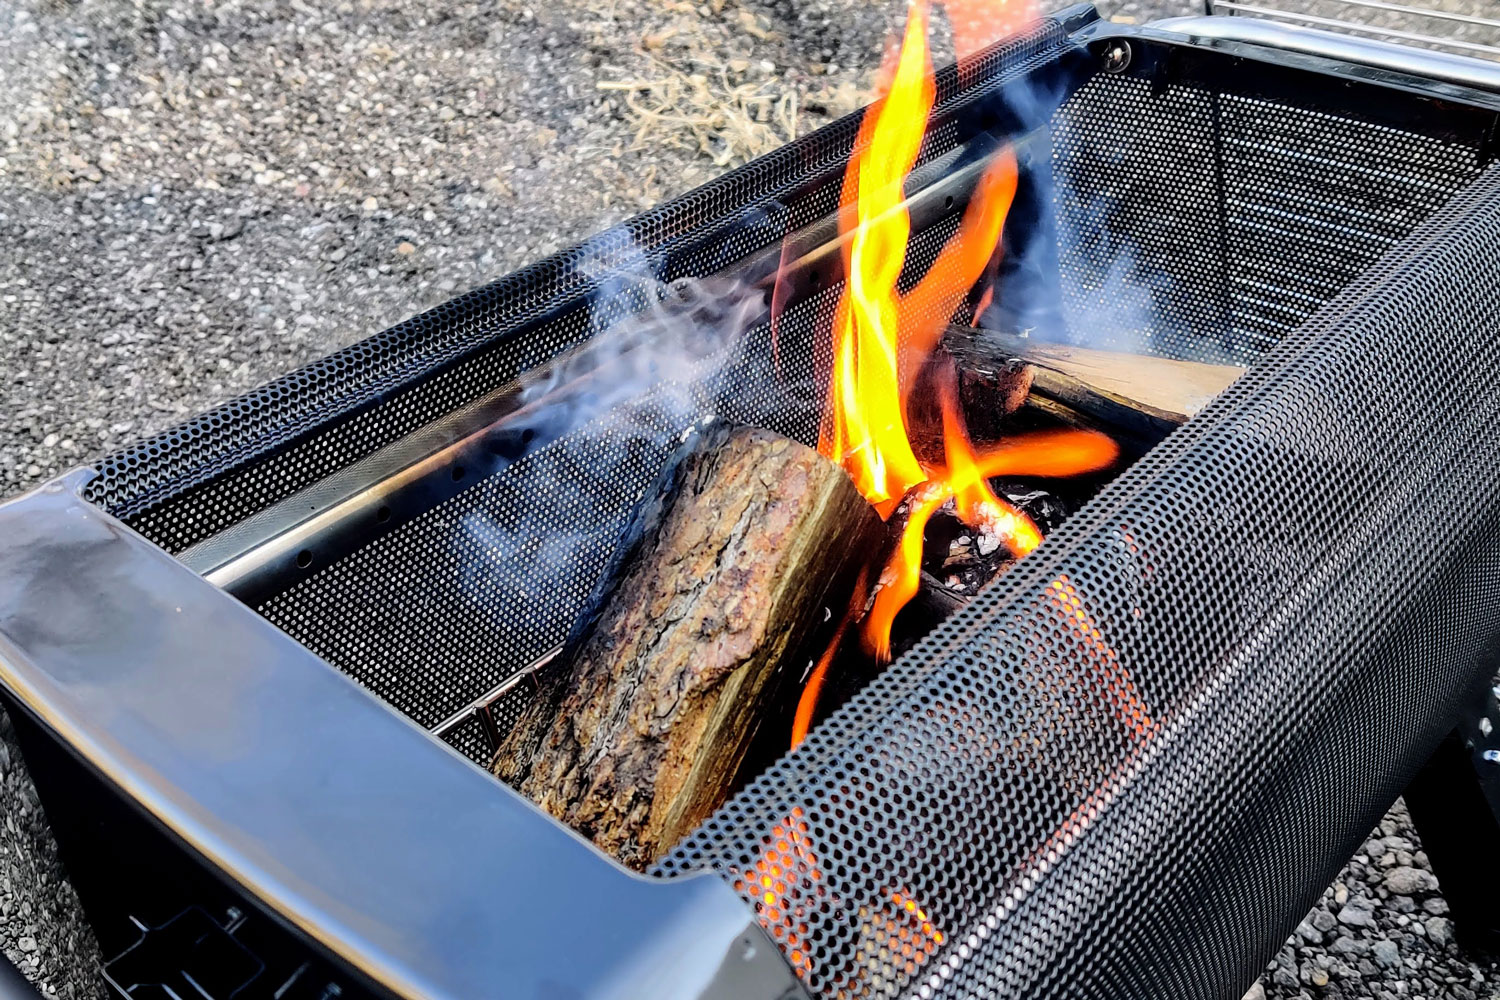 Why BioLite FirePit+ Is My New Go-to Firepit - The Manual